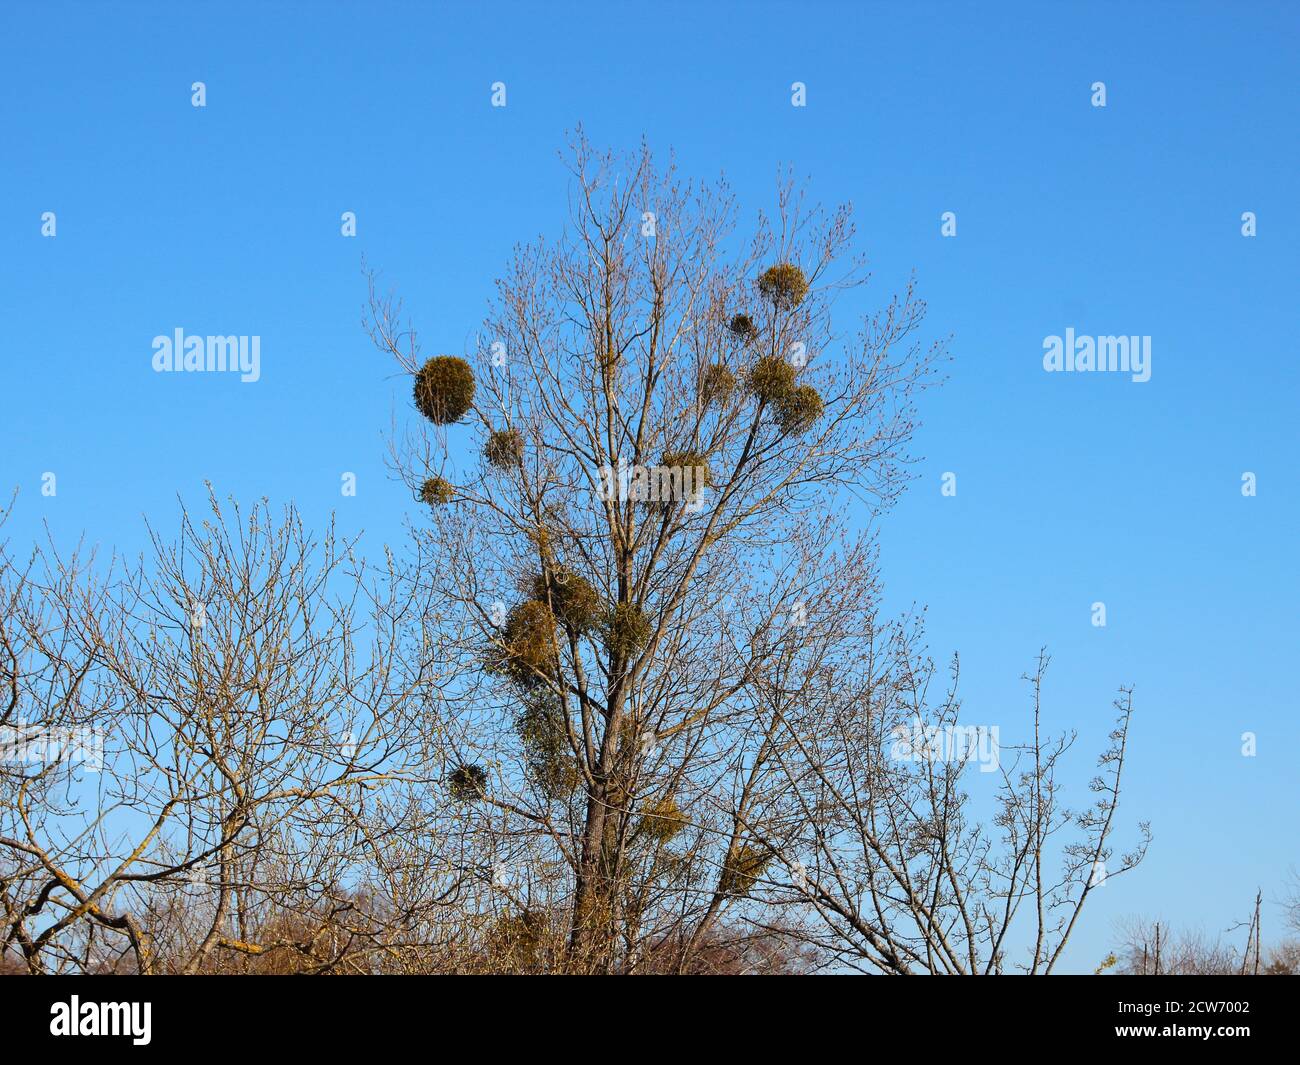 A collection of bare trees in the autumn season, with one tree in the center covered in mistletoe growths. Stock Photo